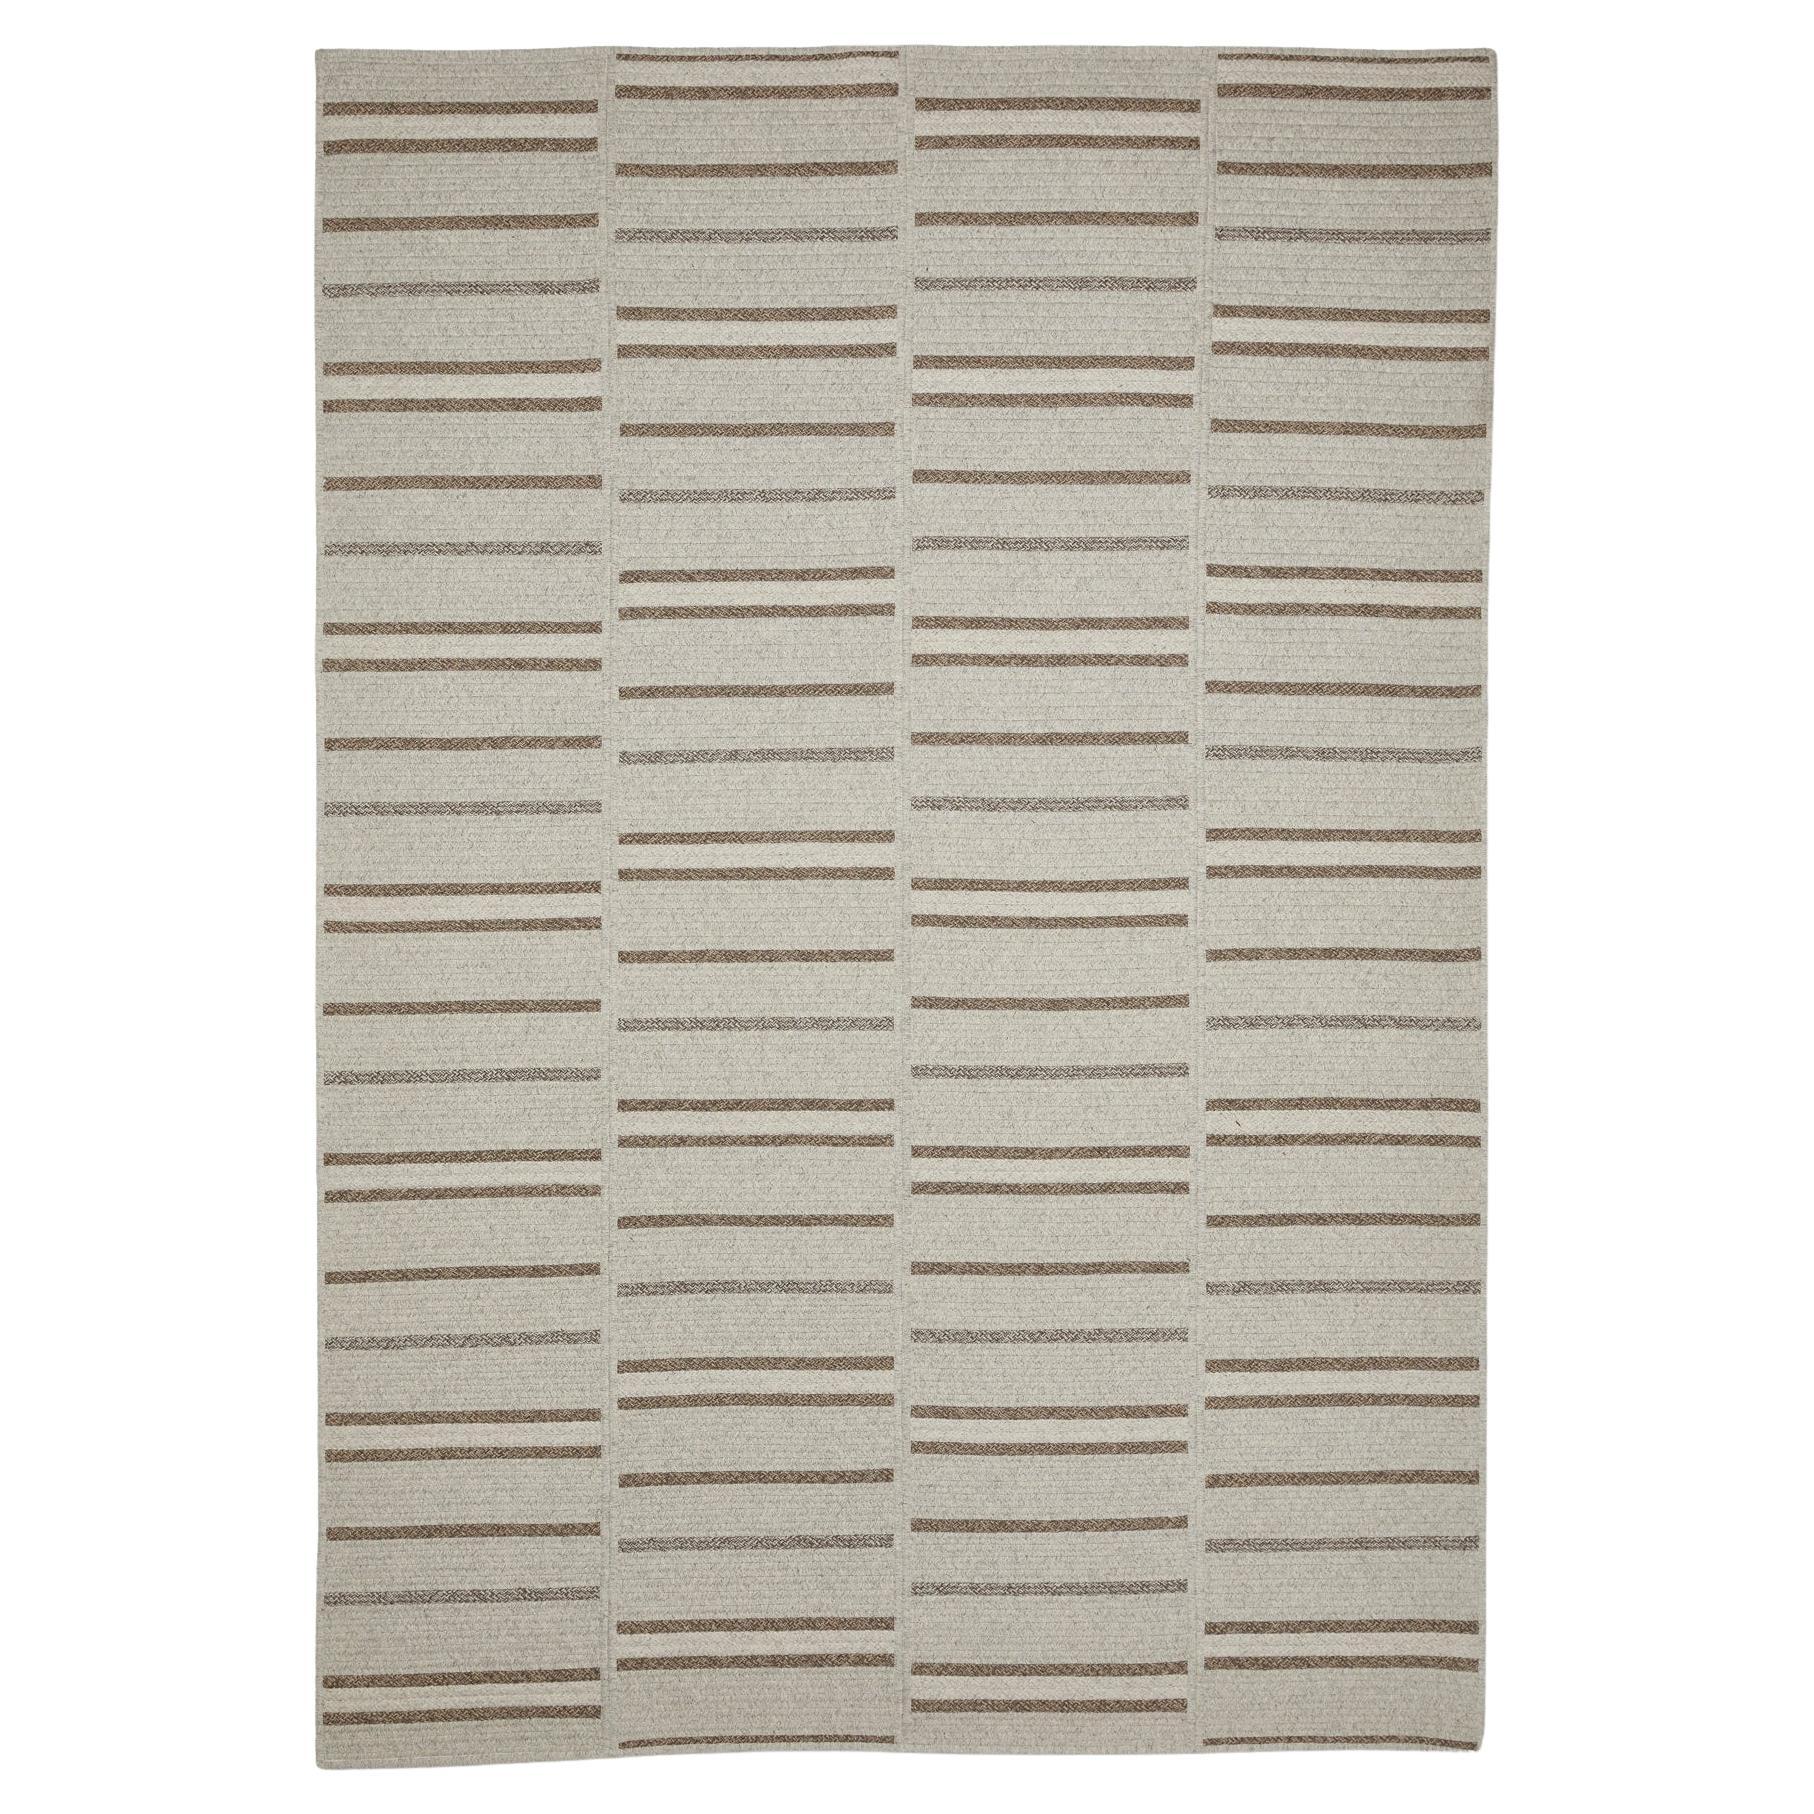 Thayer Design Studio, Natural Wool, Light Grey and Brown, 6' x 9' Trace Rug